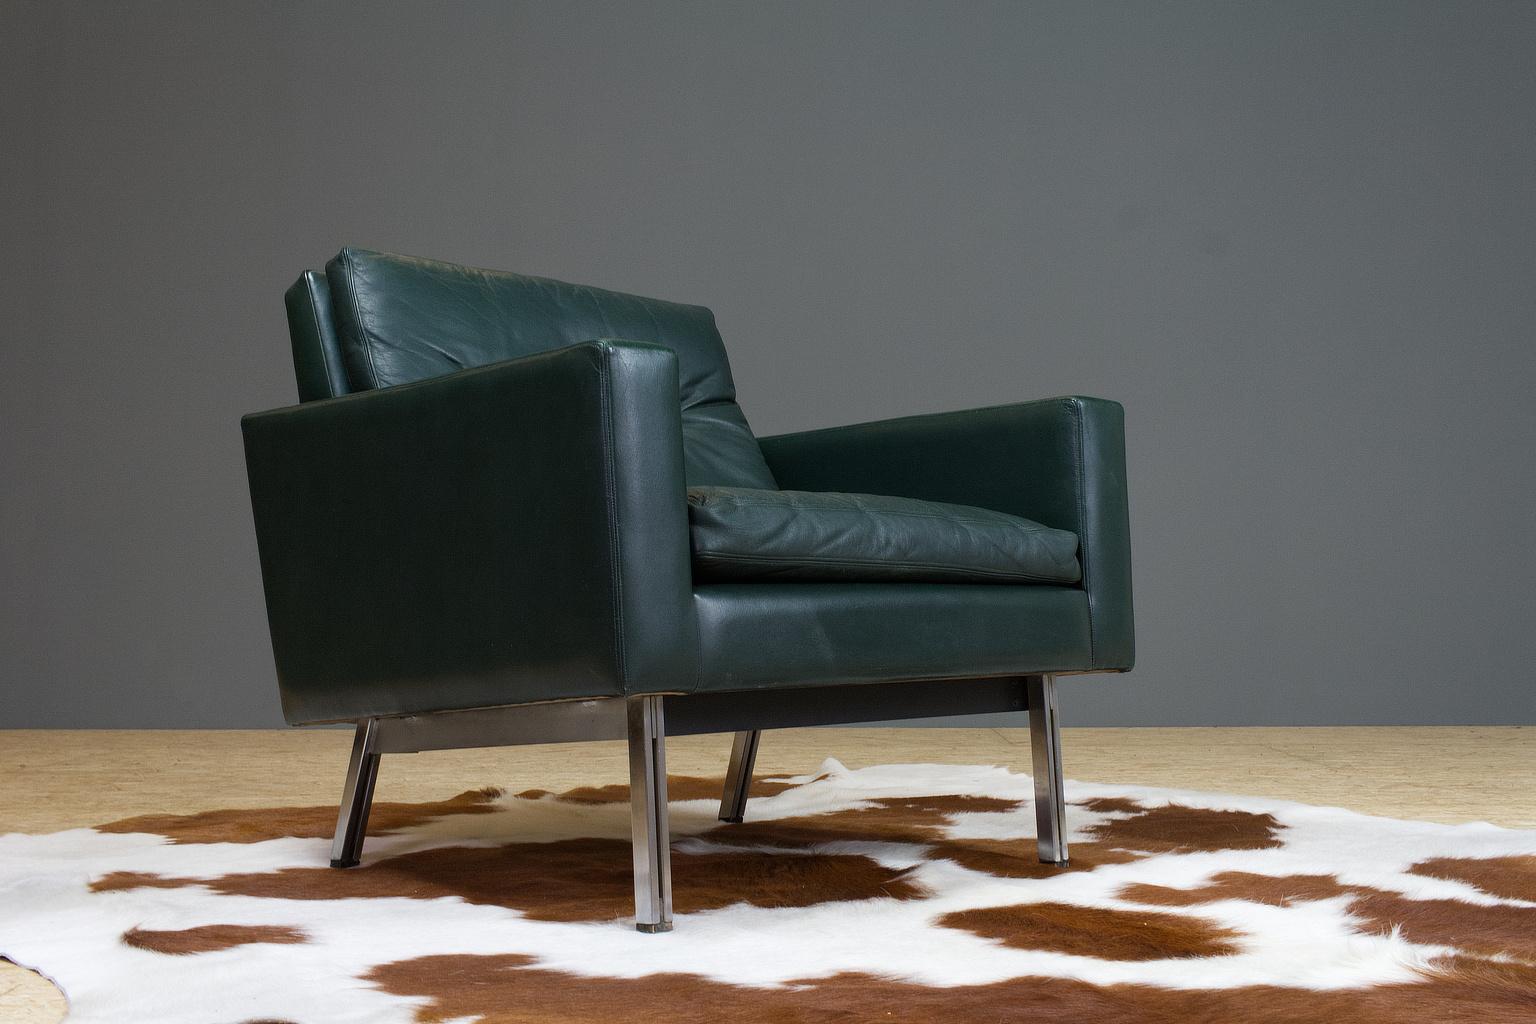 This great cube lounge chair, executed in a great quality dark green leather, was designed by Hein Salomonson and manufactered by A.Polak, Amsterdam 1960s. The chair is in good vintage condition, as shown on photos. The construction of the chromed